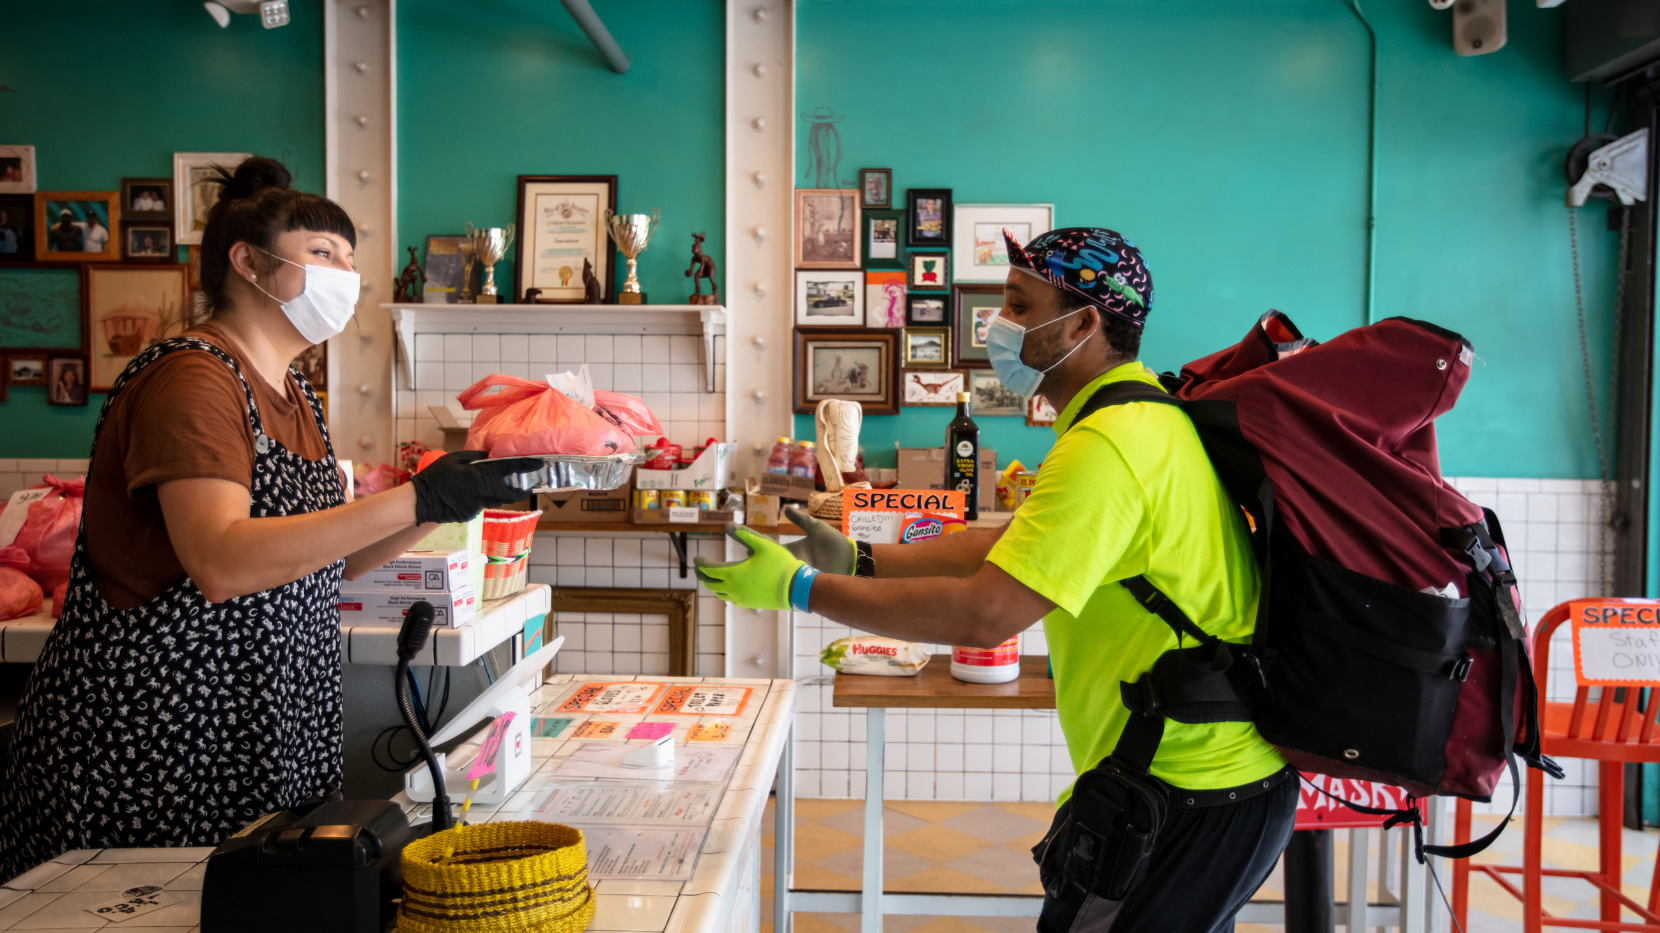 A Food Delivery Man Grabbing Takeout During the Pandemic